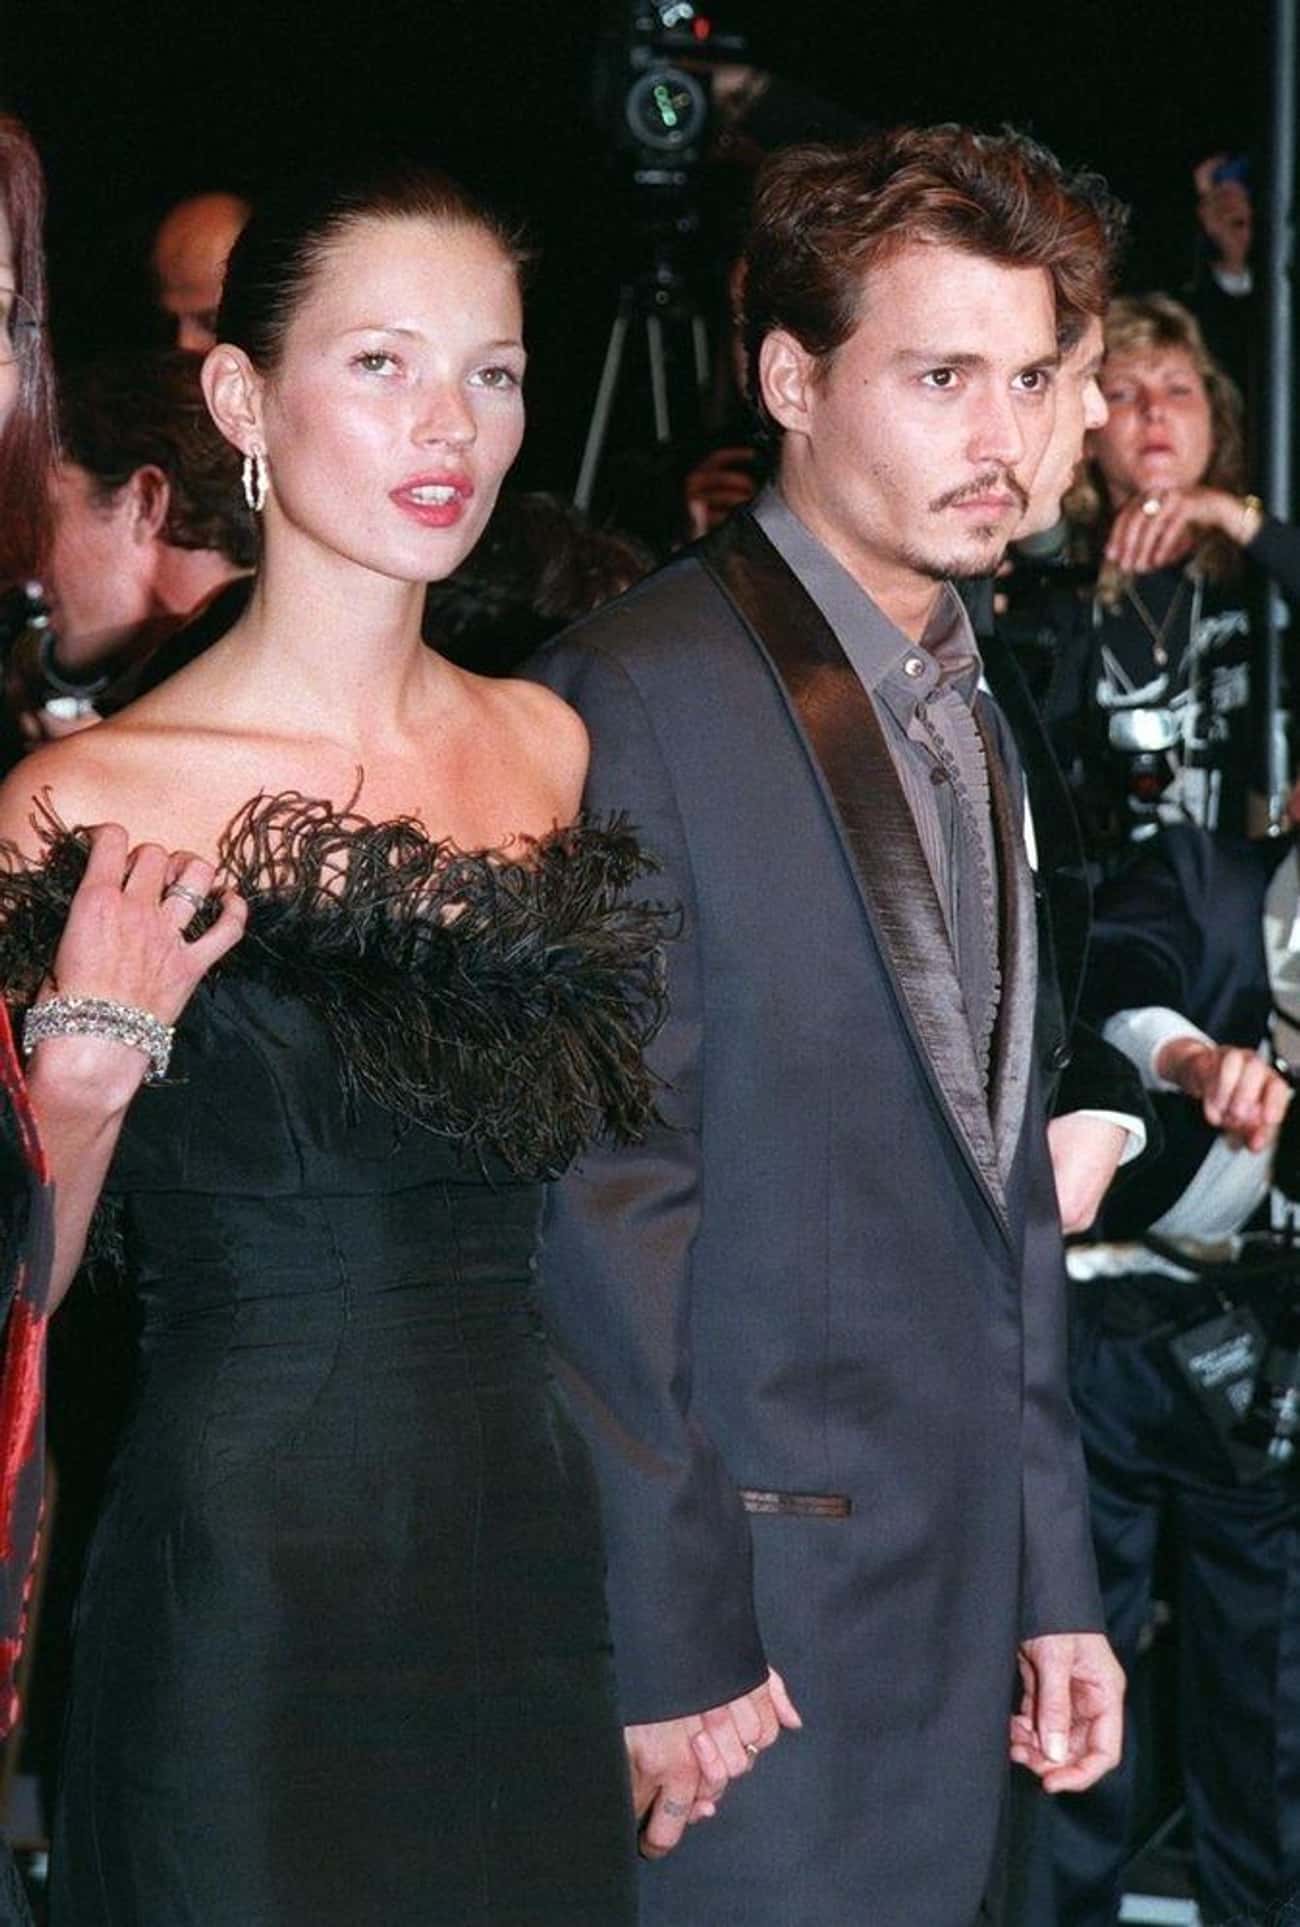 Her Relationship With Johnny Depp Was Marked By Excess And Public Strife